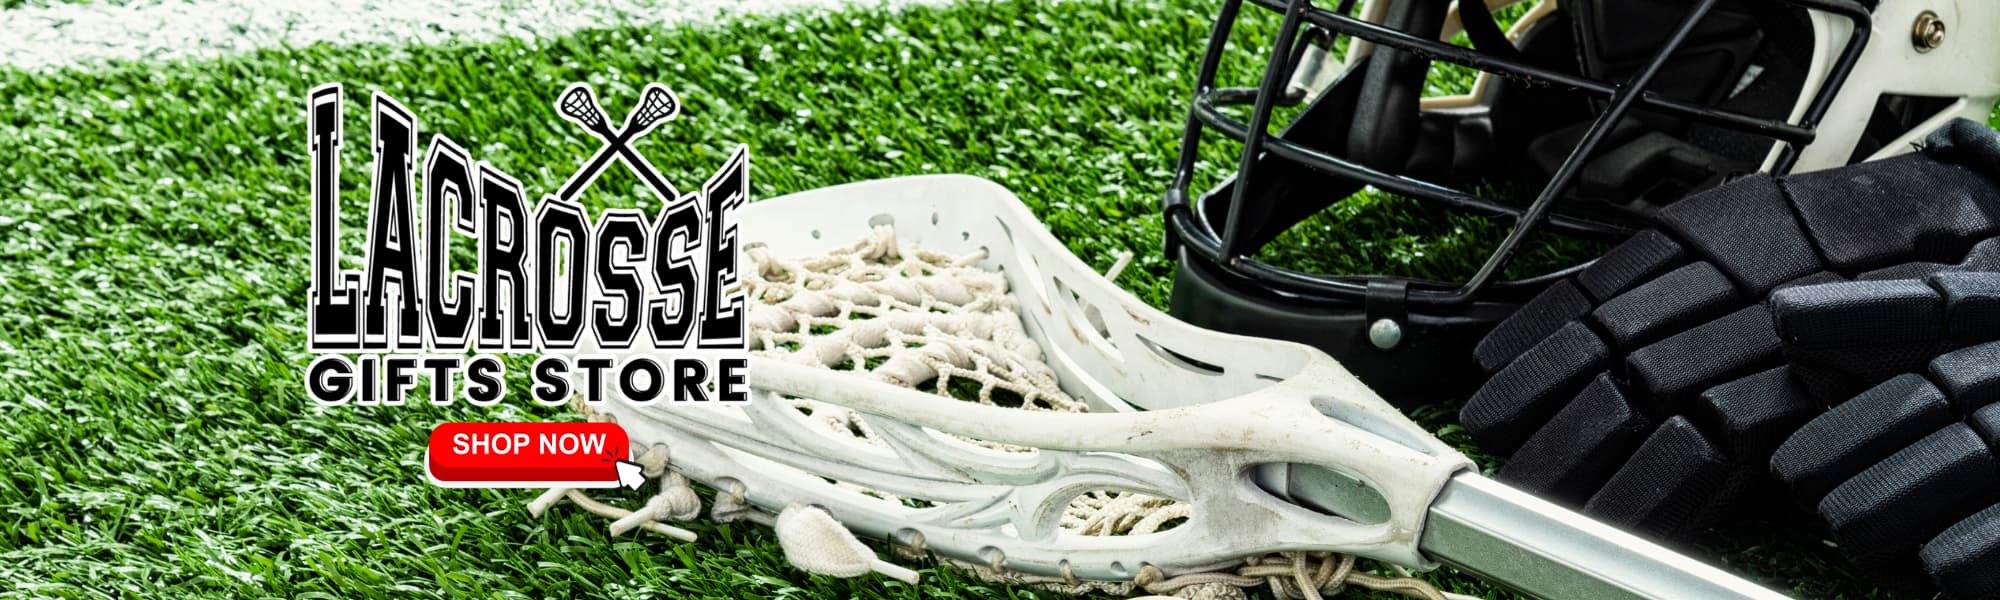 Lacrosse Gifts Store Banner1